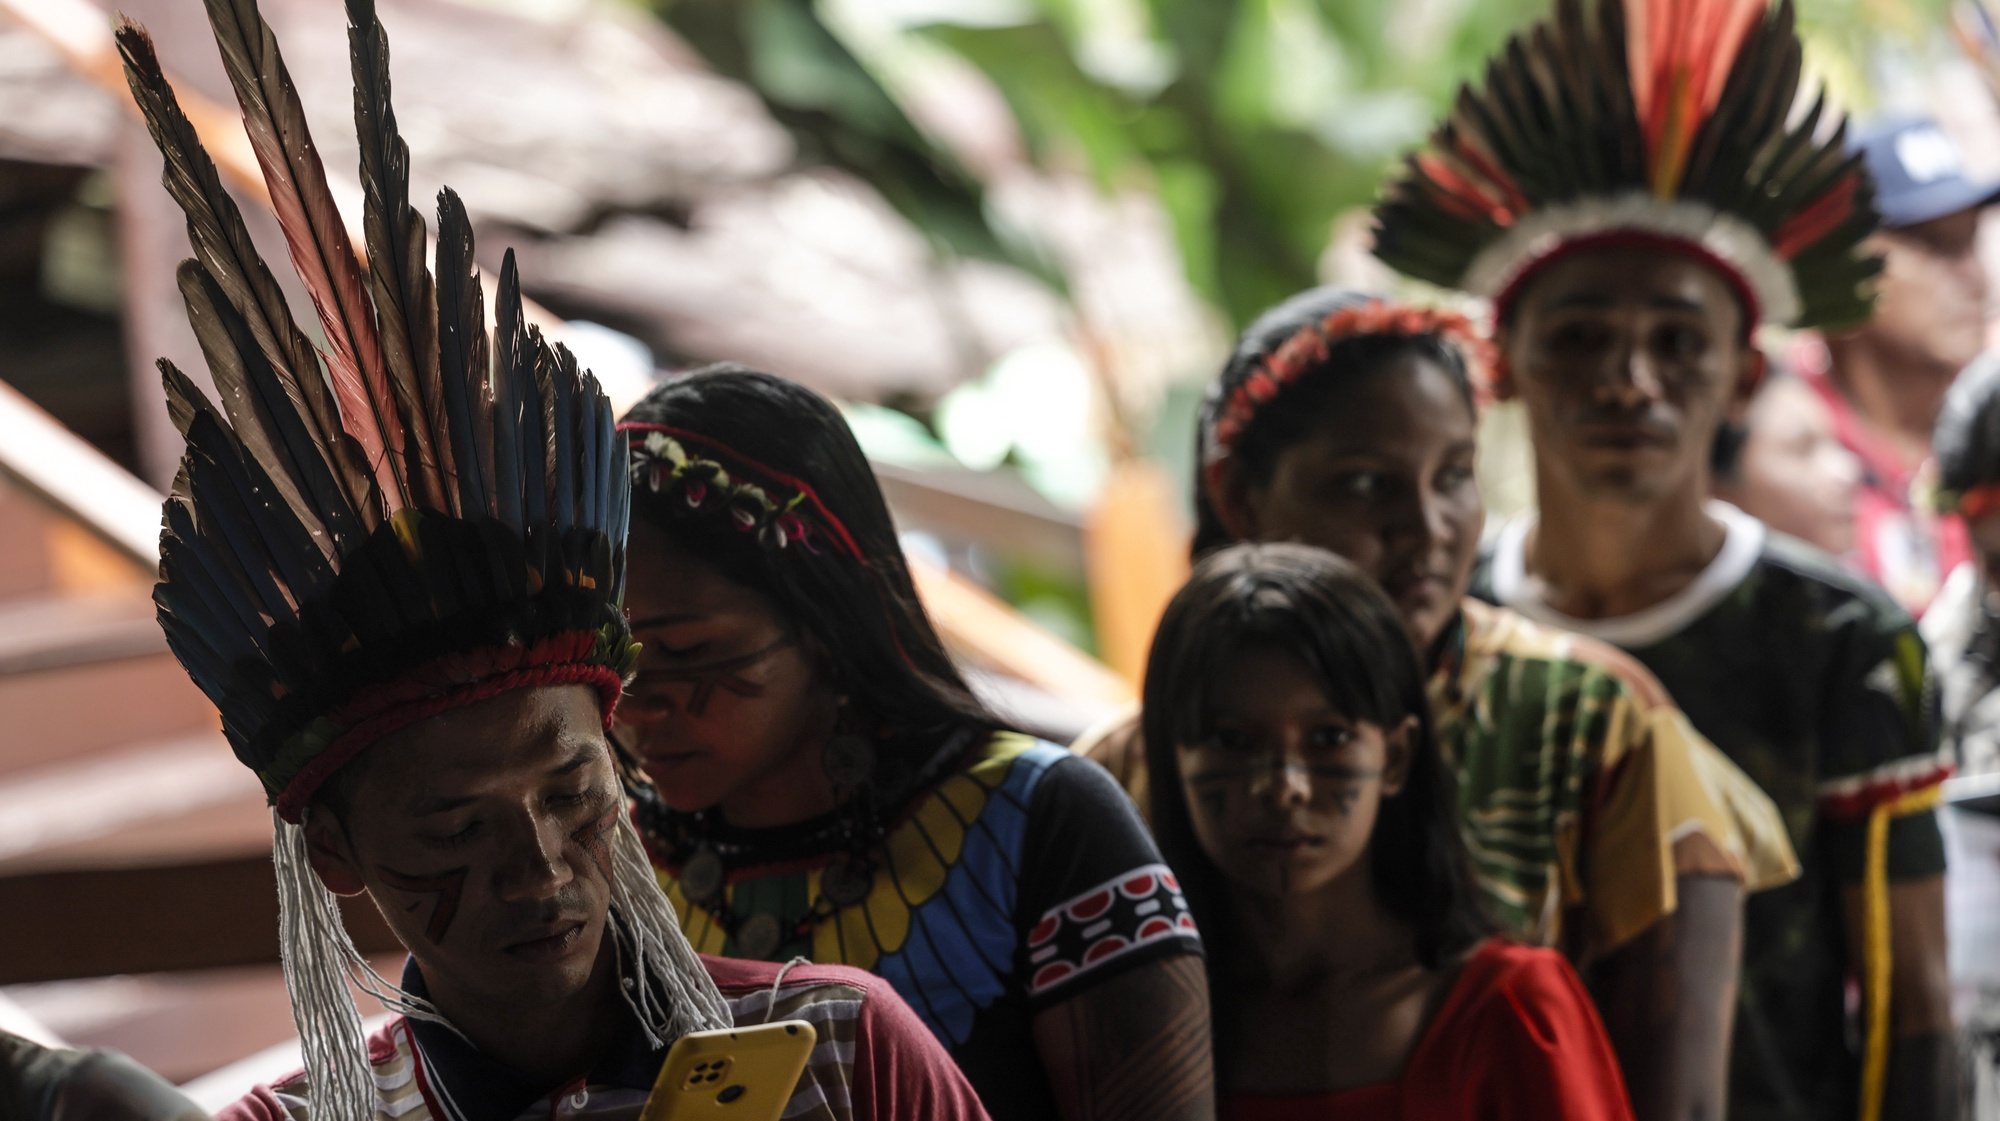 epa10784951 Indigenous people line up to receive lunch at the Igarape Park, in Belem, Para state, Brazil, 04 August 2023. The park will serve as accommodation for the indigenous communities visiting the city this week for the Amazon Dialogues. During these three days of debates, representatives from different sectors of society will debate, from 04 to 06 August, the future of the Amazon biome. The leaders of the countries of the Amazon Cooperation Treaty Organization (OTCA) will gather in the capital of Para state on 08 and 09 August for a summit, where they will receive the conclusions from the Amazon Dialogues.  EPA/Antonio Lacerda